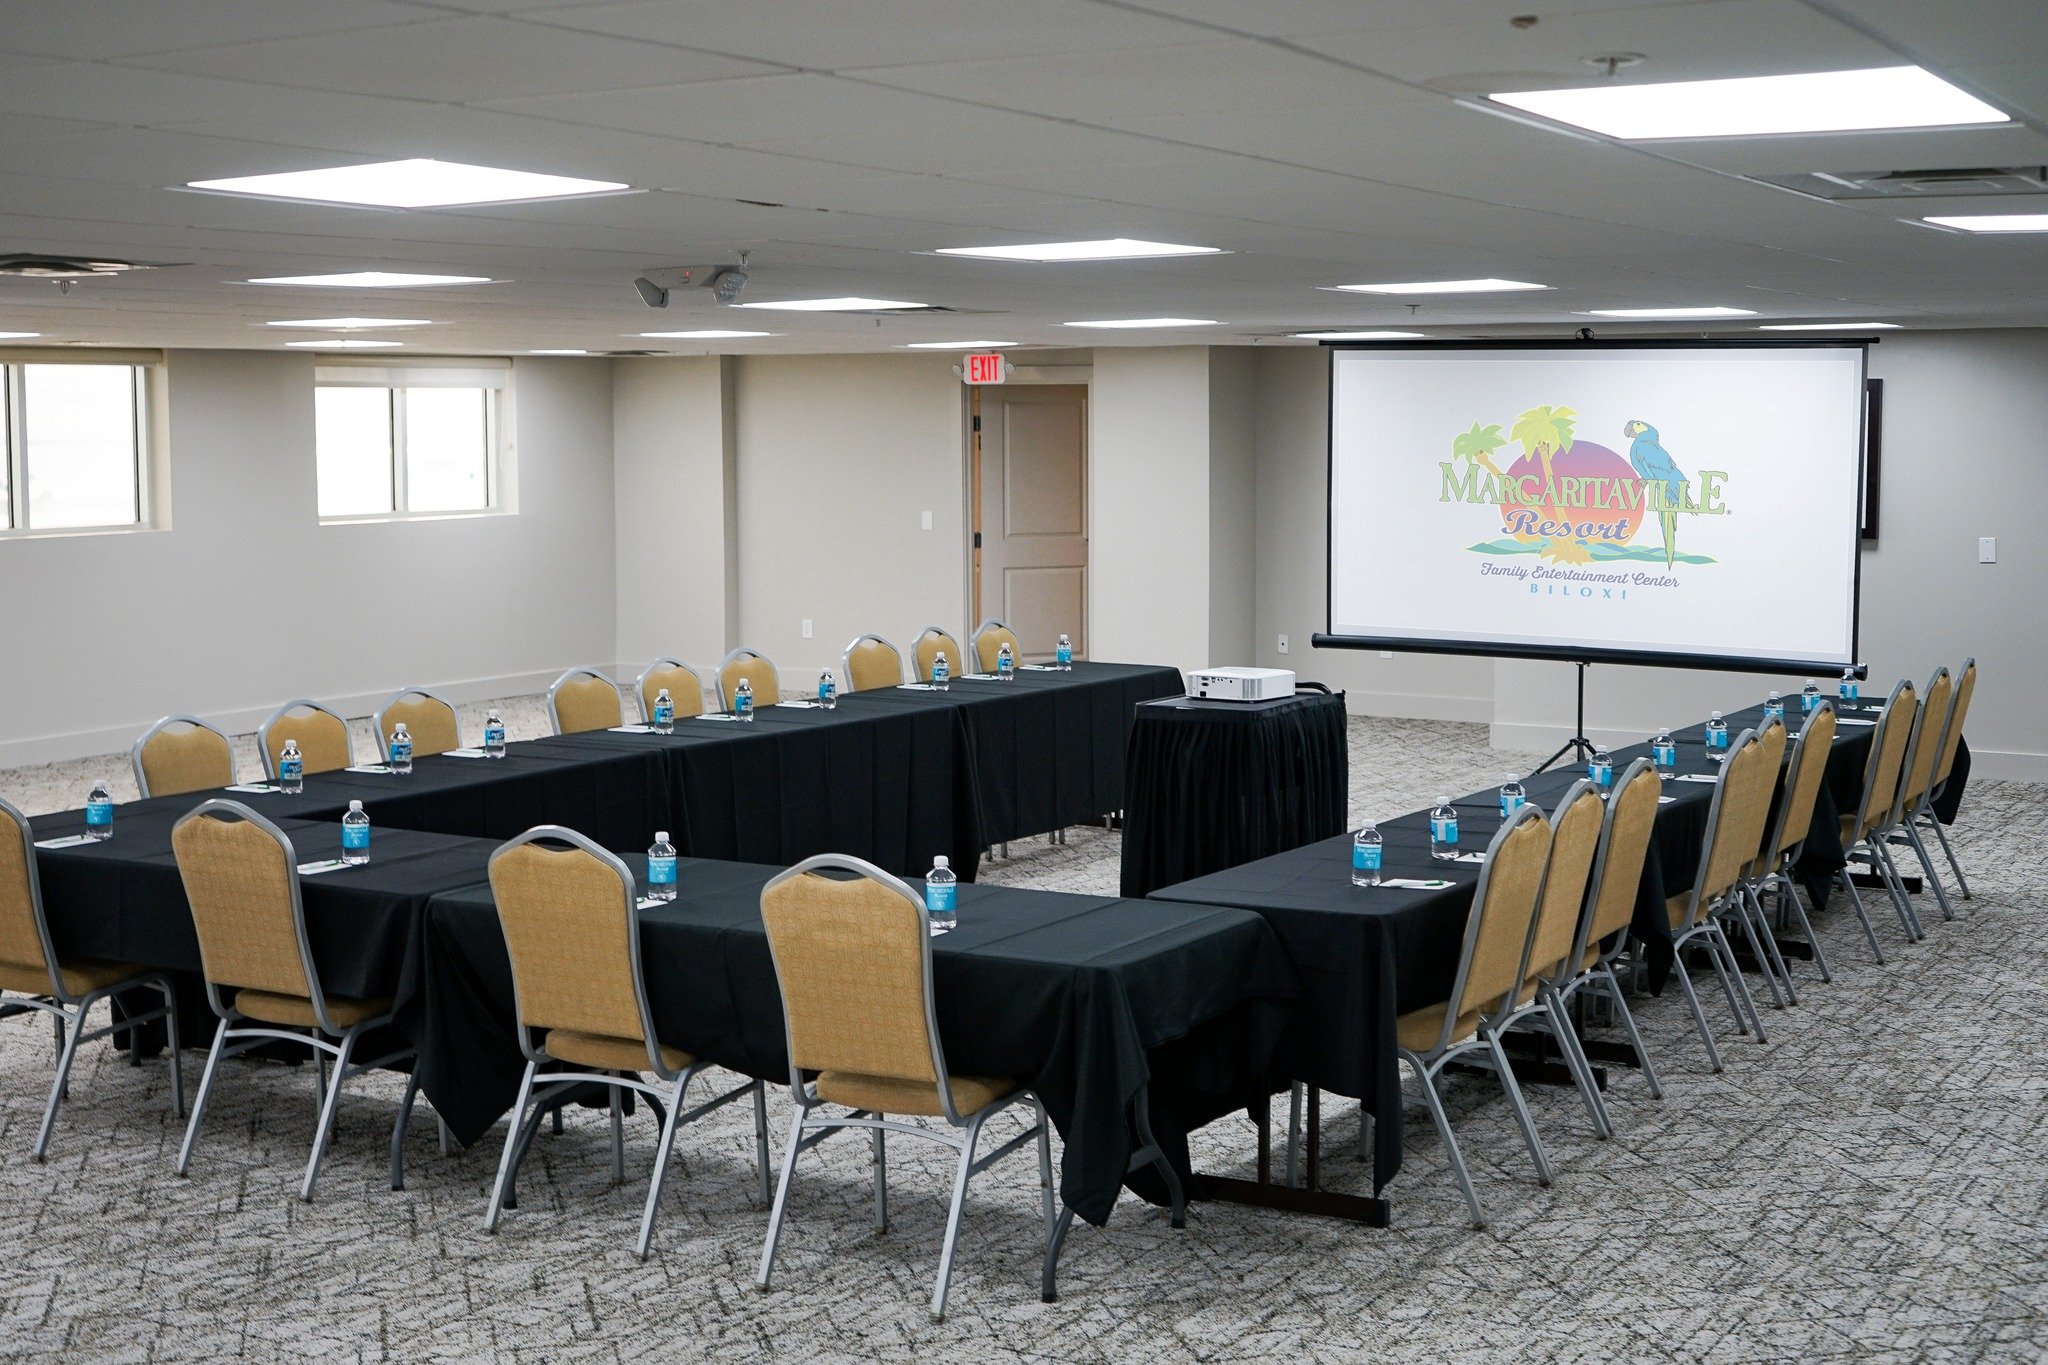 Unleash Productivity in Paradise at Margaritaville Resort Biloxi!
Escape the ordinary and elevate your business meetings and events at Margaritaville Resort Biloxi. 🌴 Our newly designed meeting spaces offer a perfect blend of professionalism and par